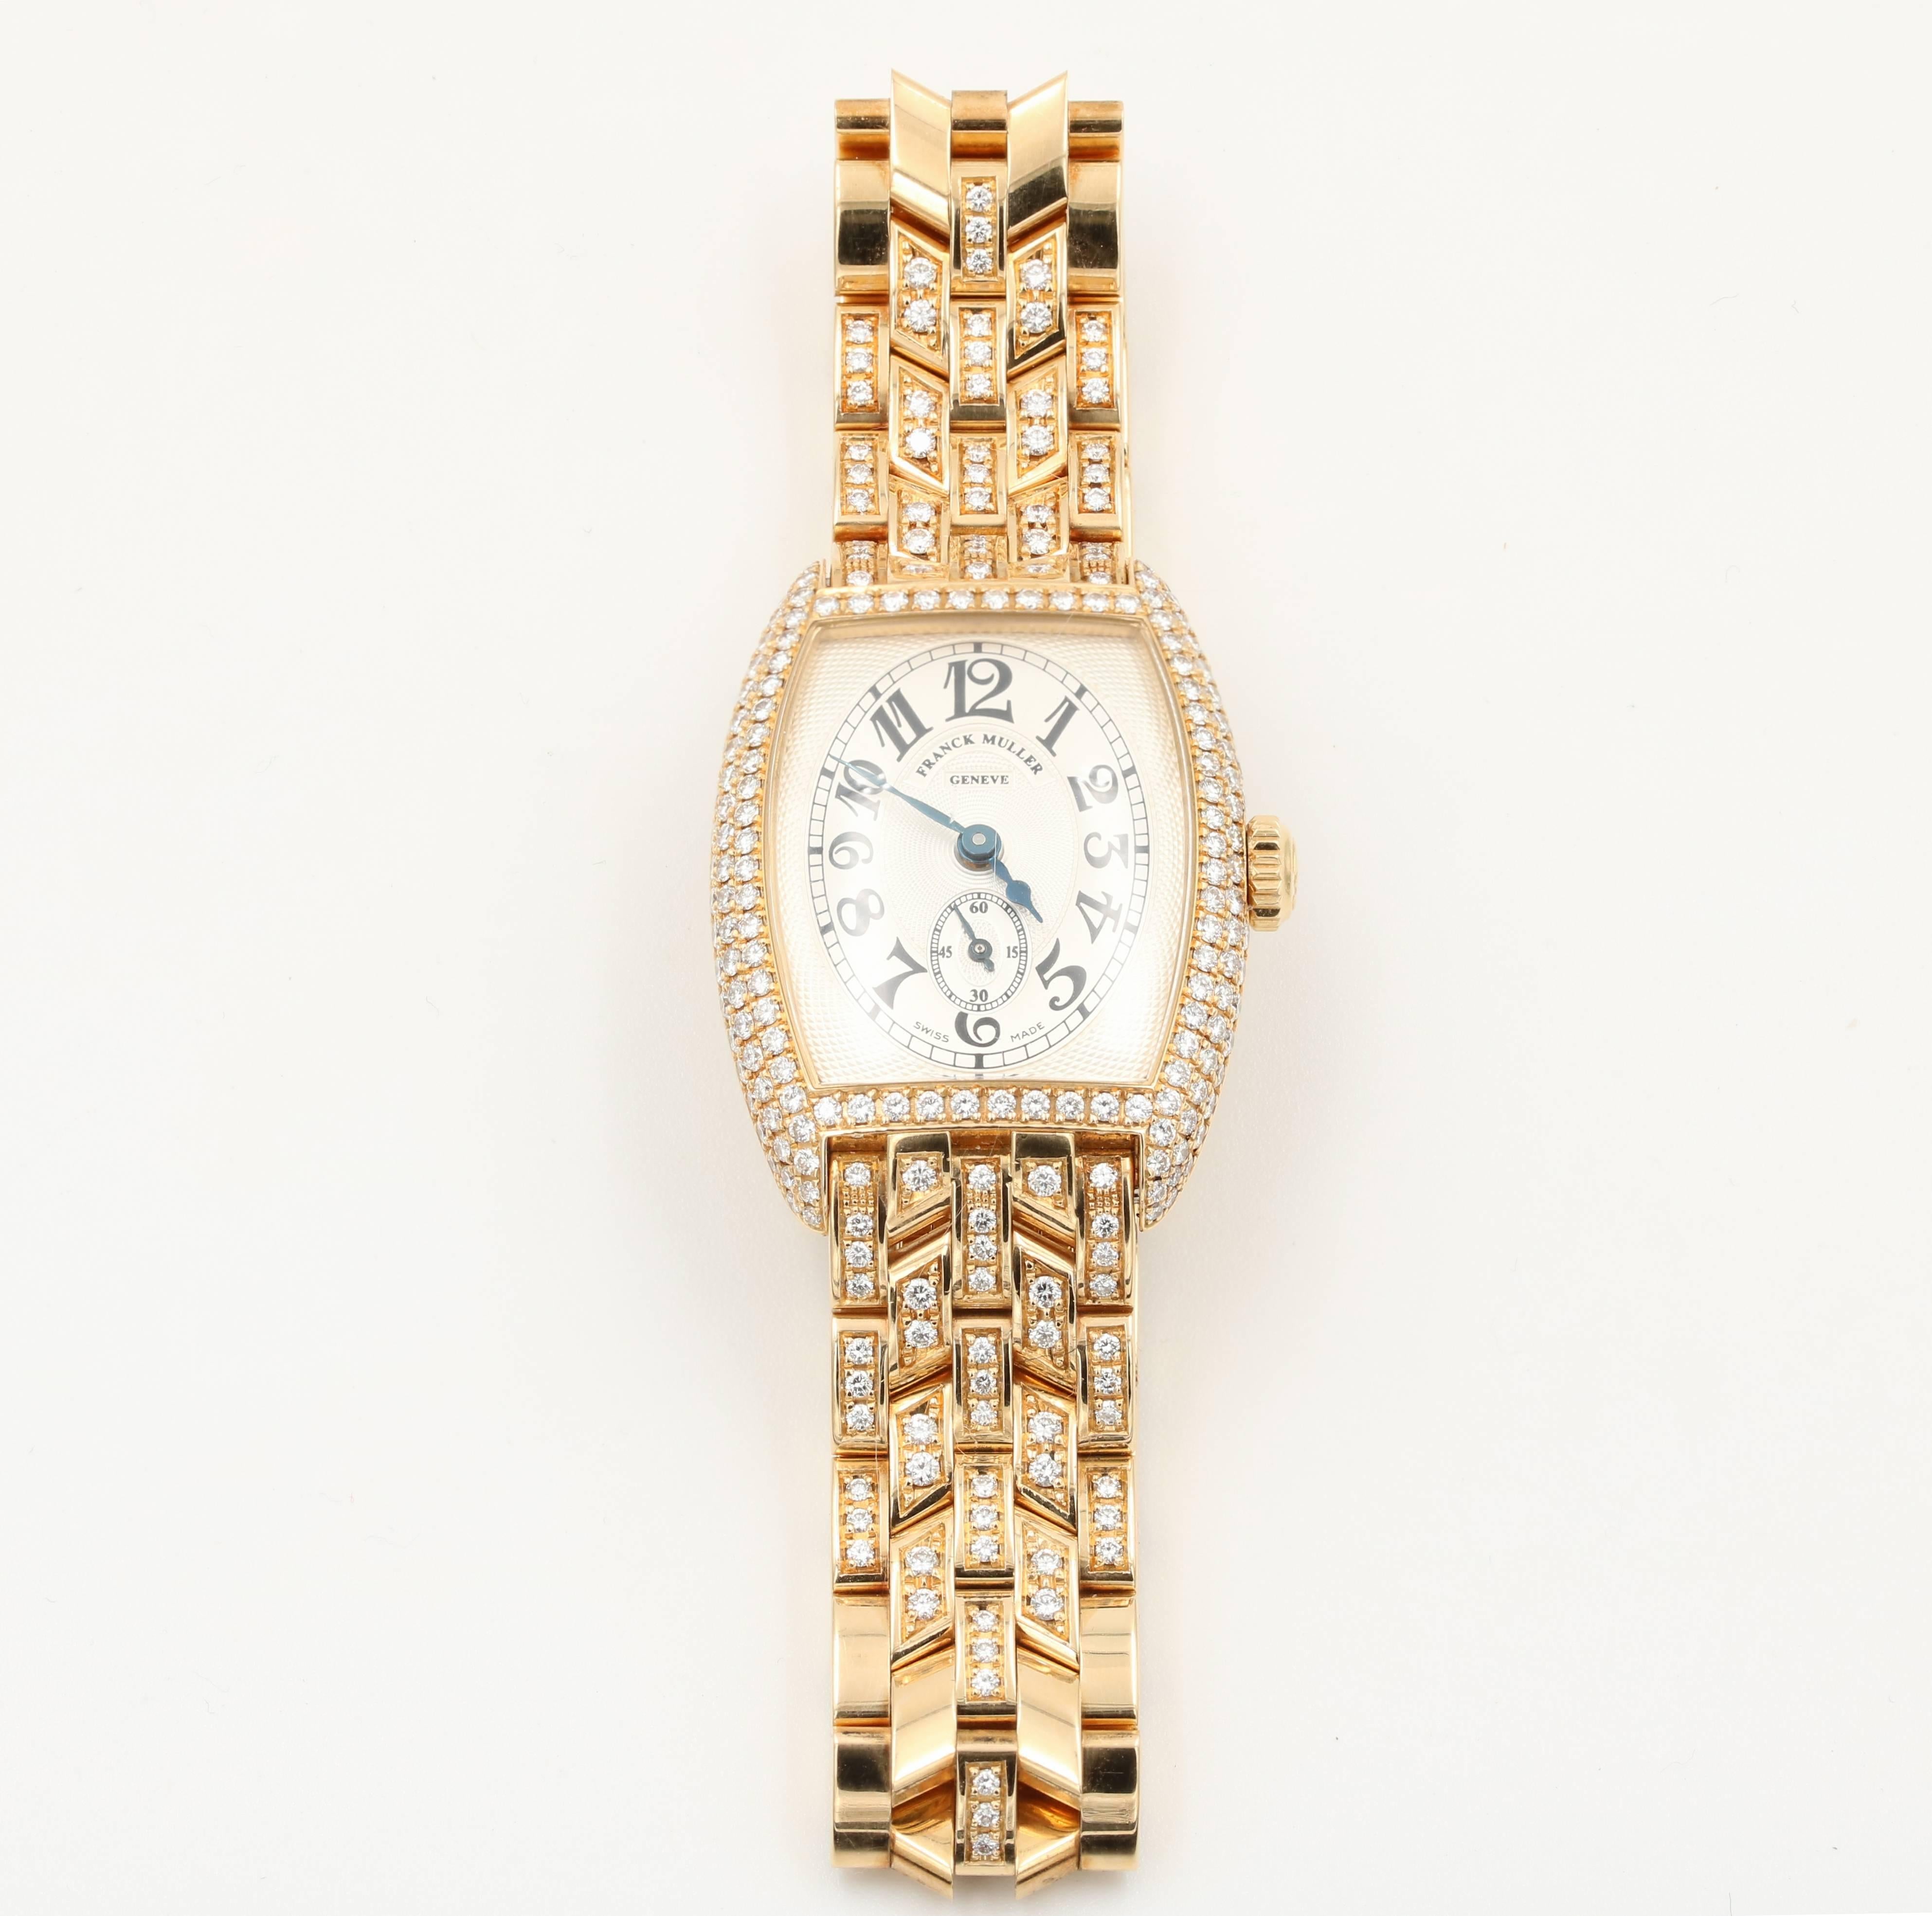 Franck Muller Chronometro Ladies 18K yellow gold and Diamond Watch
Includes Original Box and Paperwork and extra links
Montre Cintrée Curvex
163 Round Diamonds 1.72 carats
Rare movement, Mechanical Anchor
21600 vibrations per hour
Diameter of the